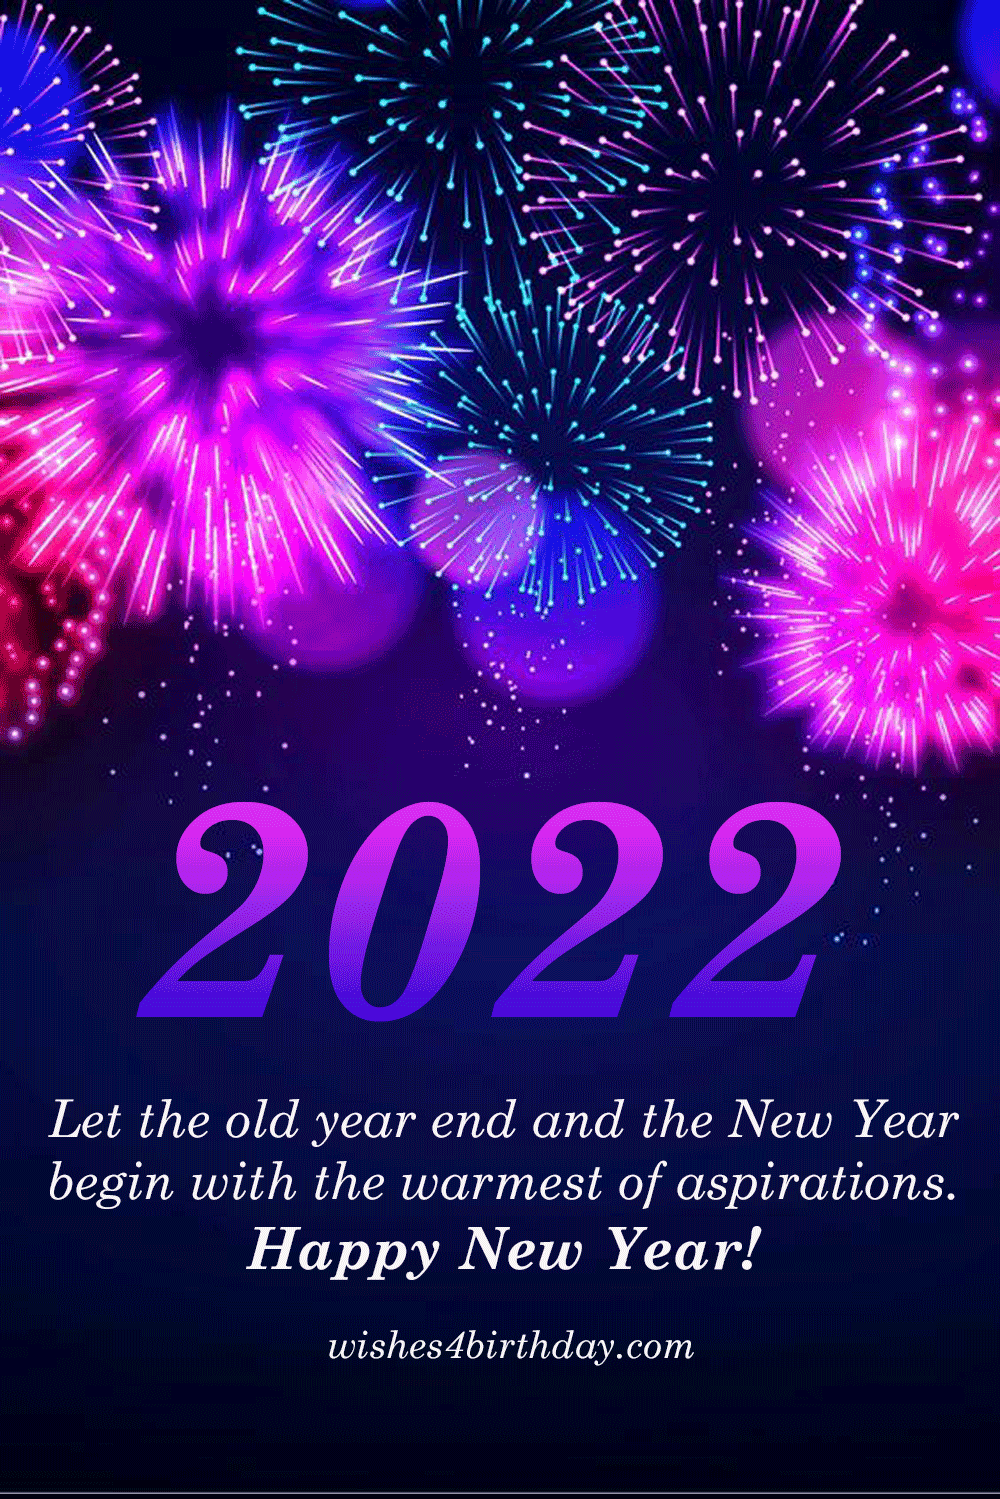 Let the old year end and the new year begin 2022 images with